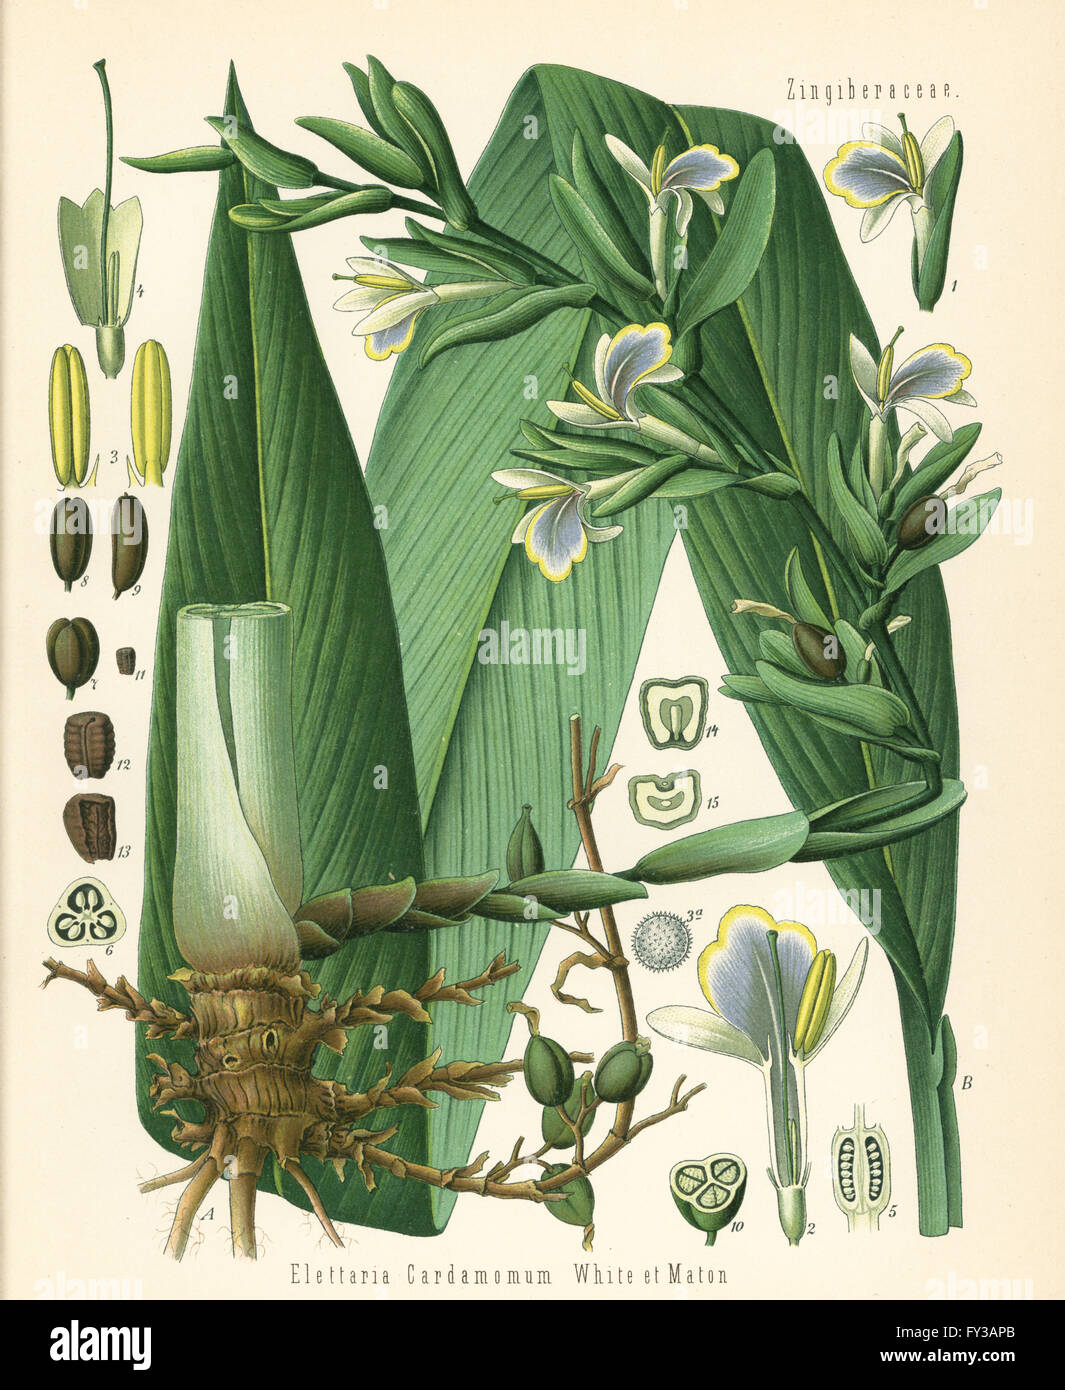 Green cardamon or true cardamon, Elettaria cardamomum. Chromolithograph after a botanical illustration from Hermann Adolph Koehler's Medicinal Plants, edited by Gustav Pabst, Koehler, Germany, 1887. Stock Photo